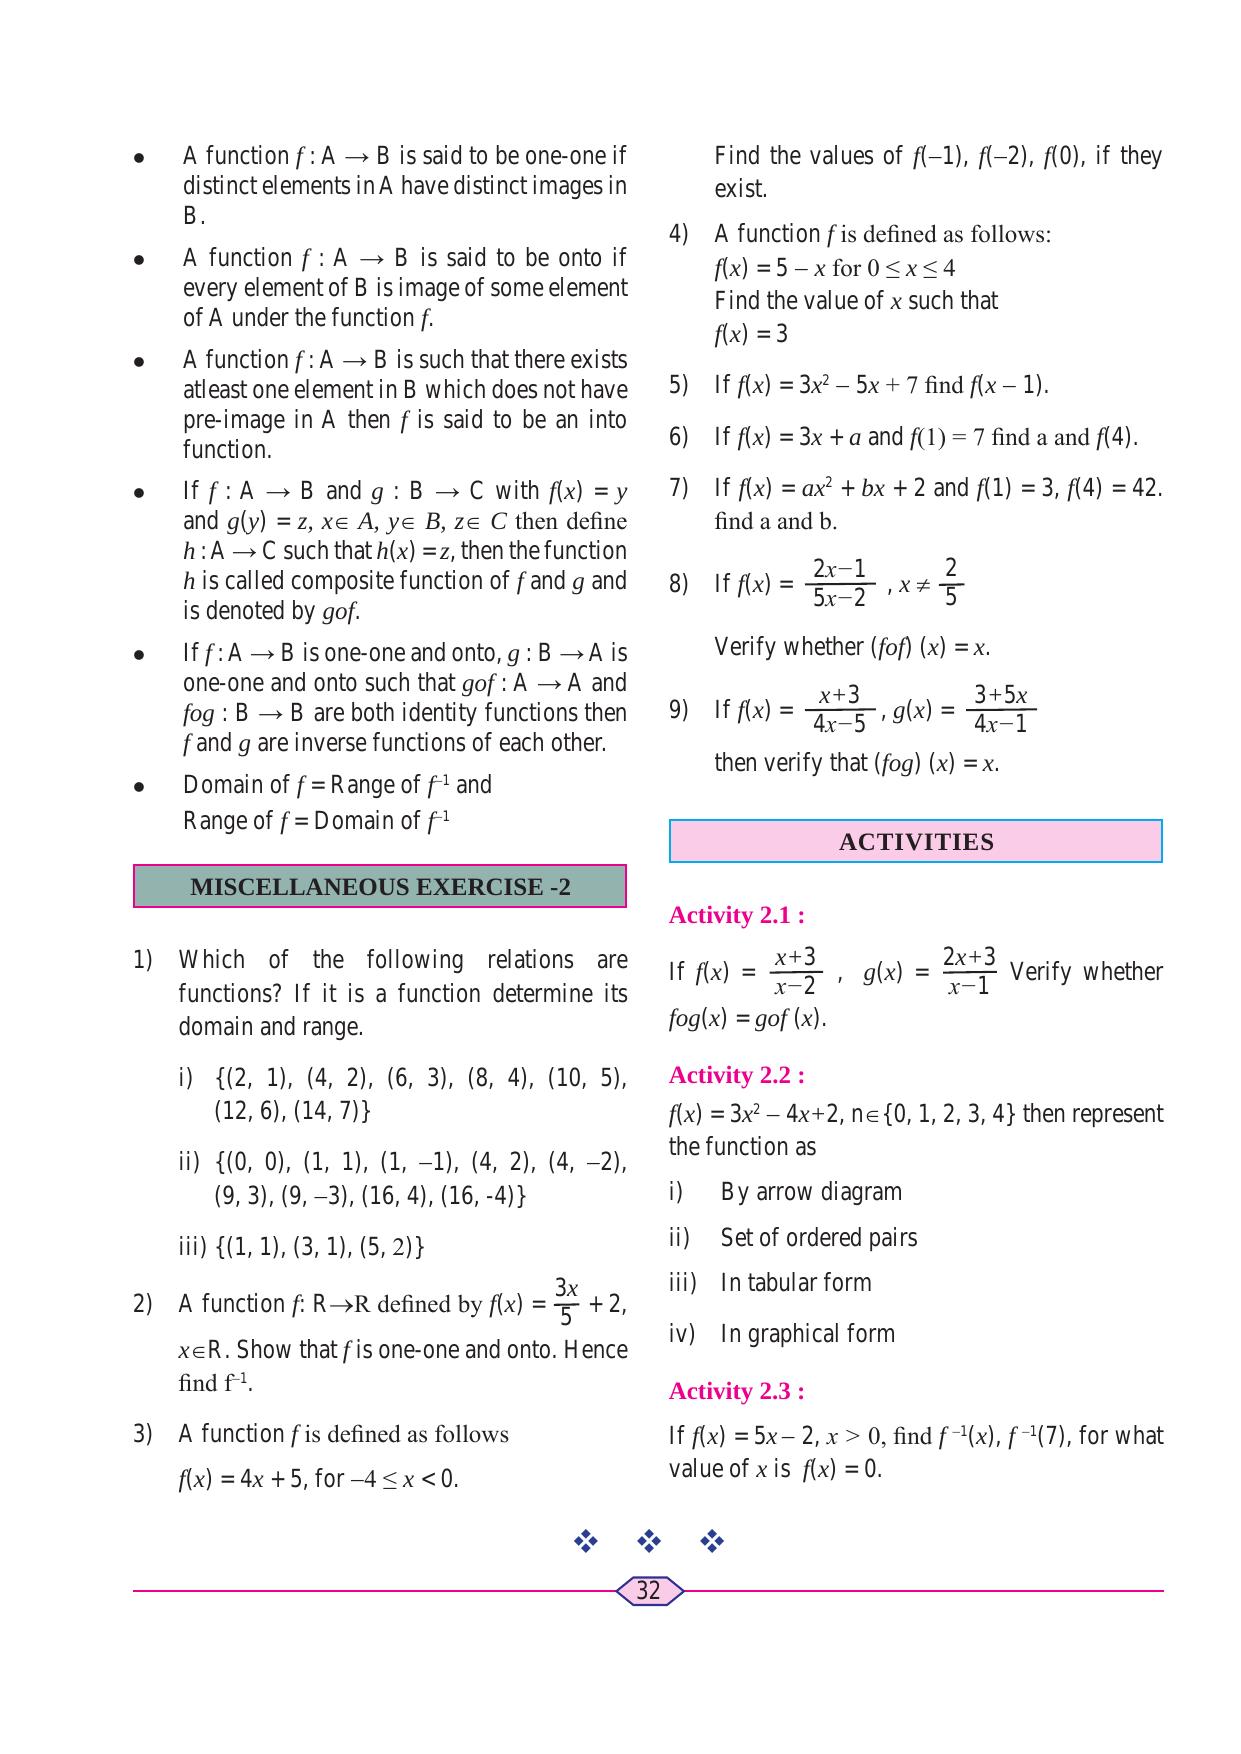 Maharashtra Board Class 11 Maths (Commerce) (Part 1) Textbook - Page 42